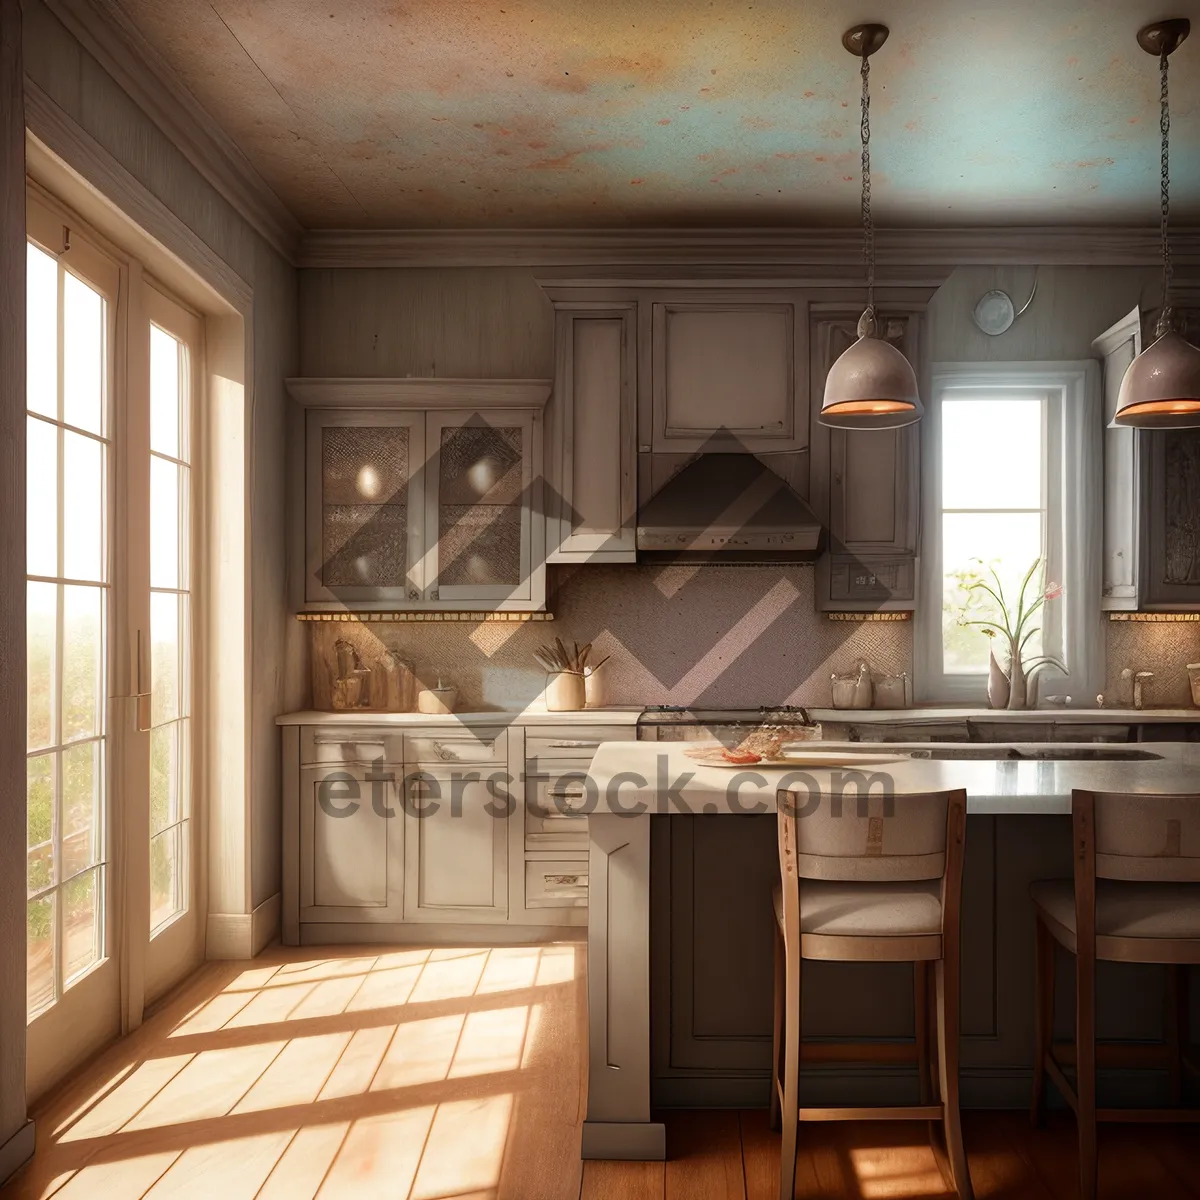 Picture of Kitchen Interior Decorated with Luxurious Wooden Furniture and Exquisite Lighting